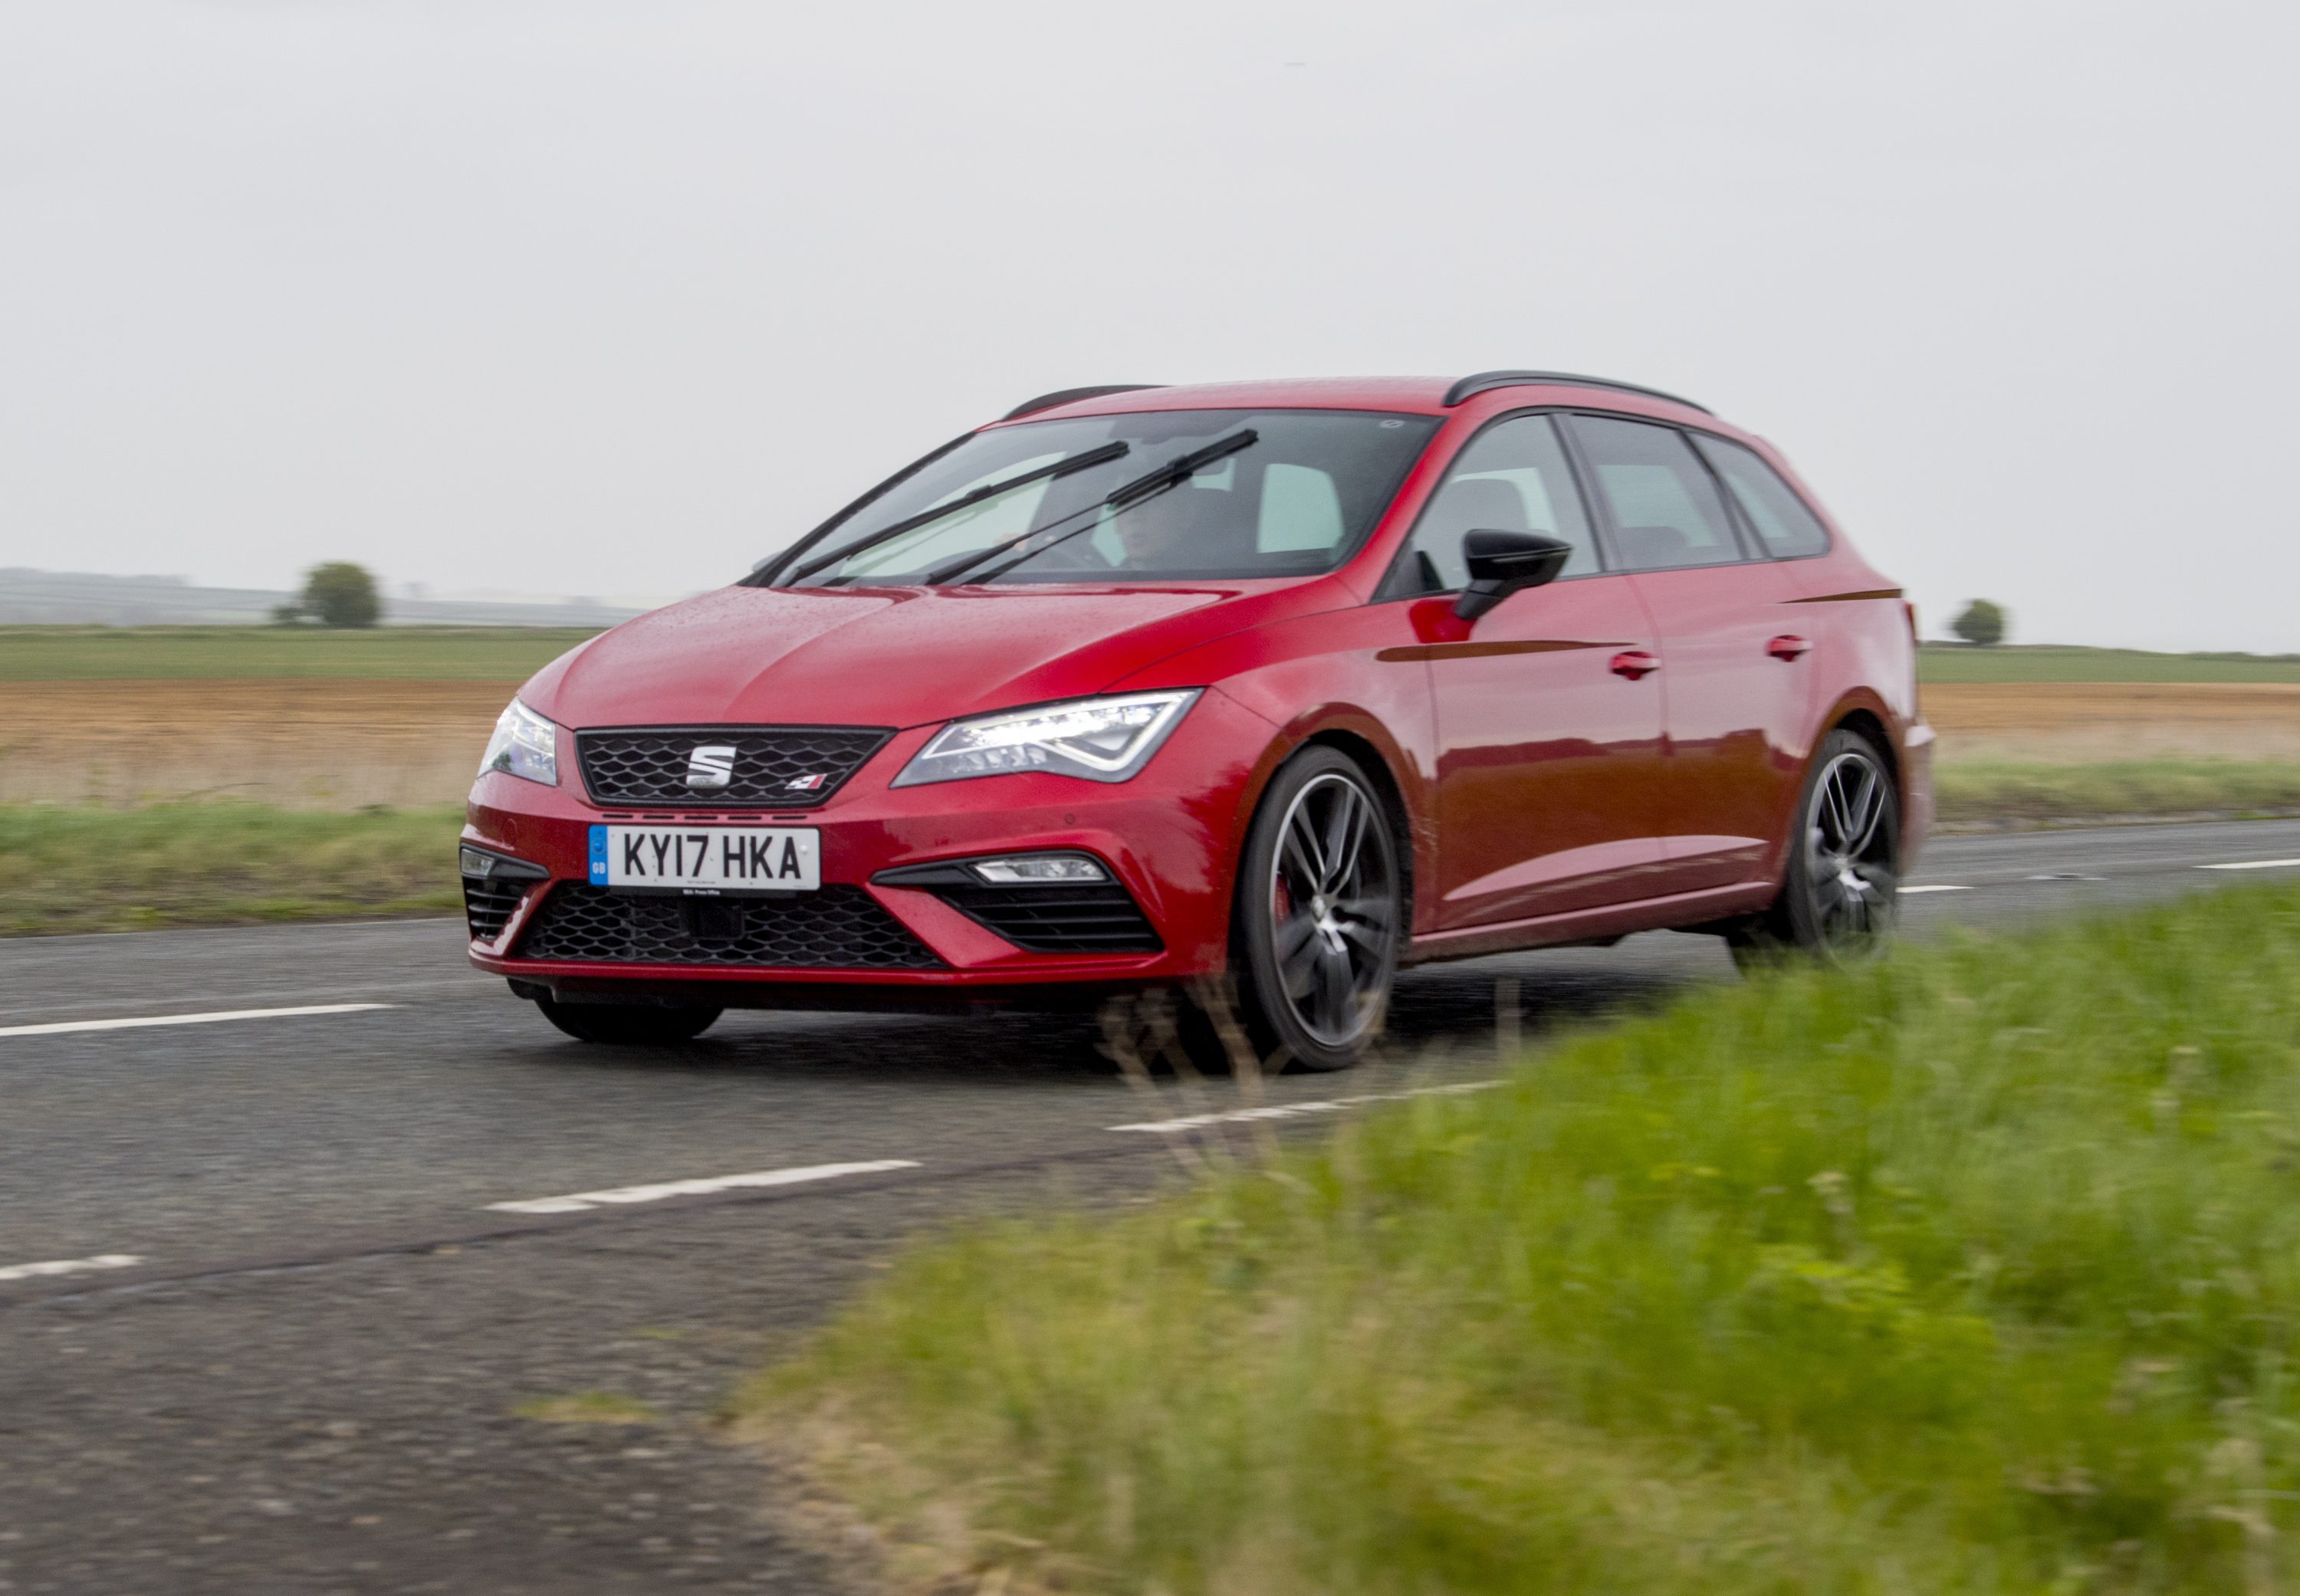 REVIEW - Seat Leon ST Cupra 300 4DRIVE – Simply